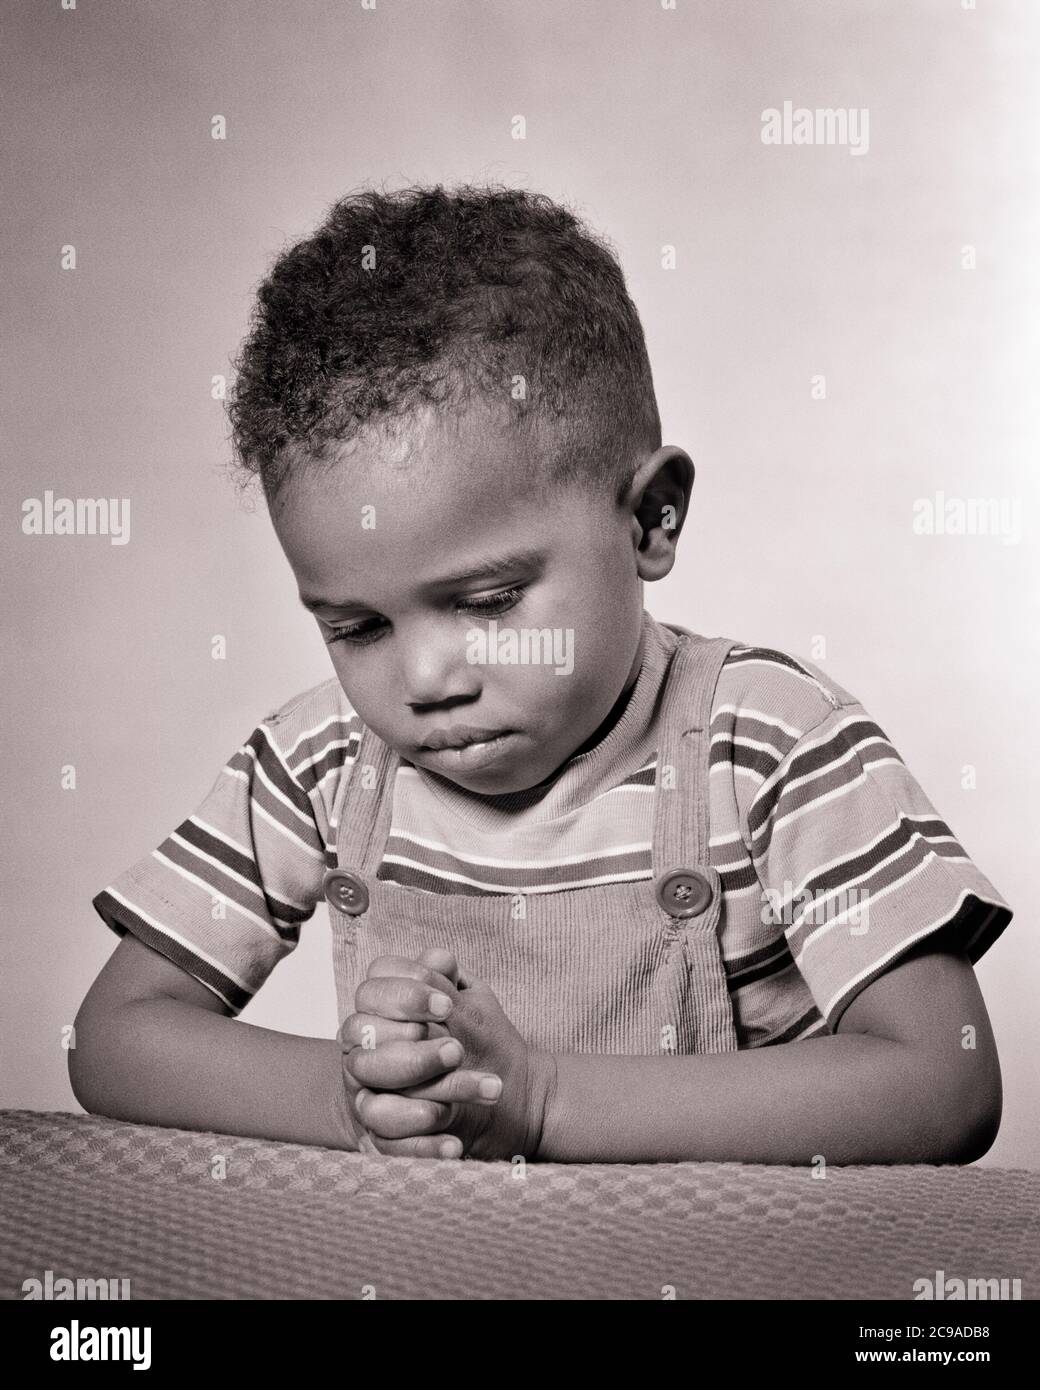 1940s DEVOUT SERIOUS YOUNG AFRICAN-AMERICAN BOY WEARING T-SHIRT AND OVERALLS KNEELING SAYING HIS PRAYERS - n625 HAR001 HARS OVERALLS MALES SPIRITUALITY CONFIDENCE EXPRESSIONS B&W KNEELING TEMPTATION DREAMS HAPPINESS WELLNESS HIS STRENGTH AFRICAN-AMERICANS COURAGE AFRICAN-AMERICAN AND CHOICE BLACK ETHNICITY PRIDE CONCEPTUAL PRAYERS STYLISH SINCERE T-SHIRT SOLEMN FOCUSED GROWTH INTENSE JUVENILES BLACK AND WHITE CAREFUL DEVOUT EARNEST HAR001 INTENT OLD FASHIONED AFRICAN AMERICANS Stock Photo